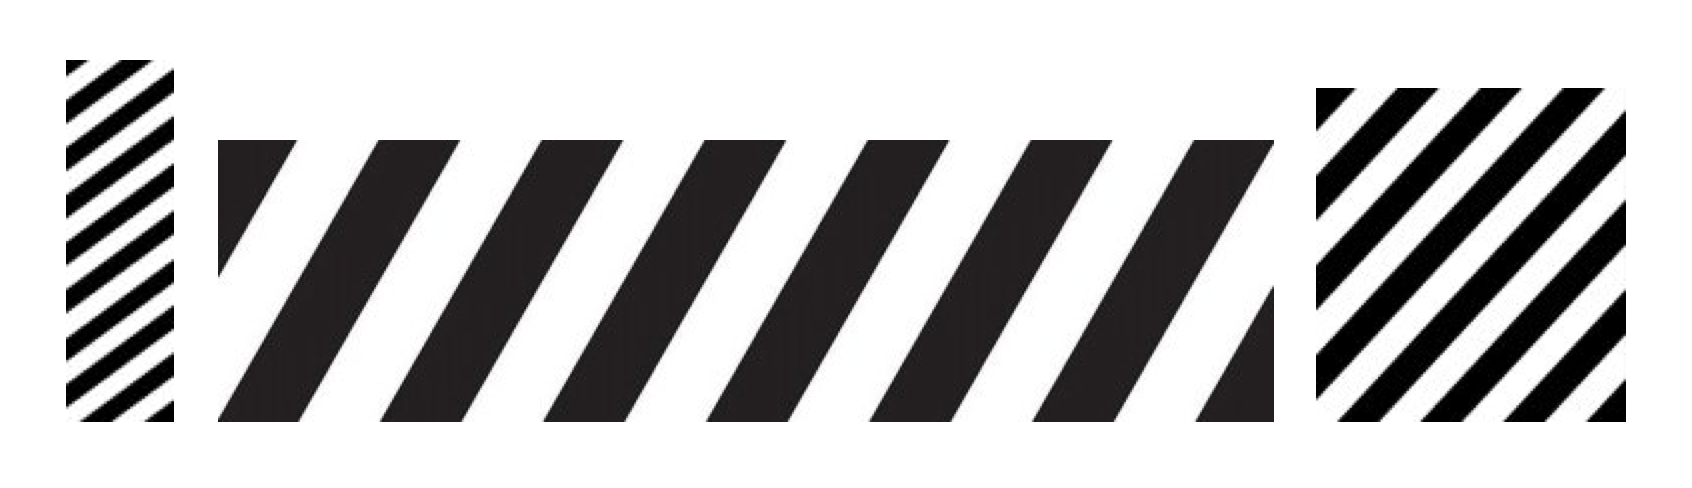 Has Off-White Just Confirmed Its New Logo?